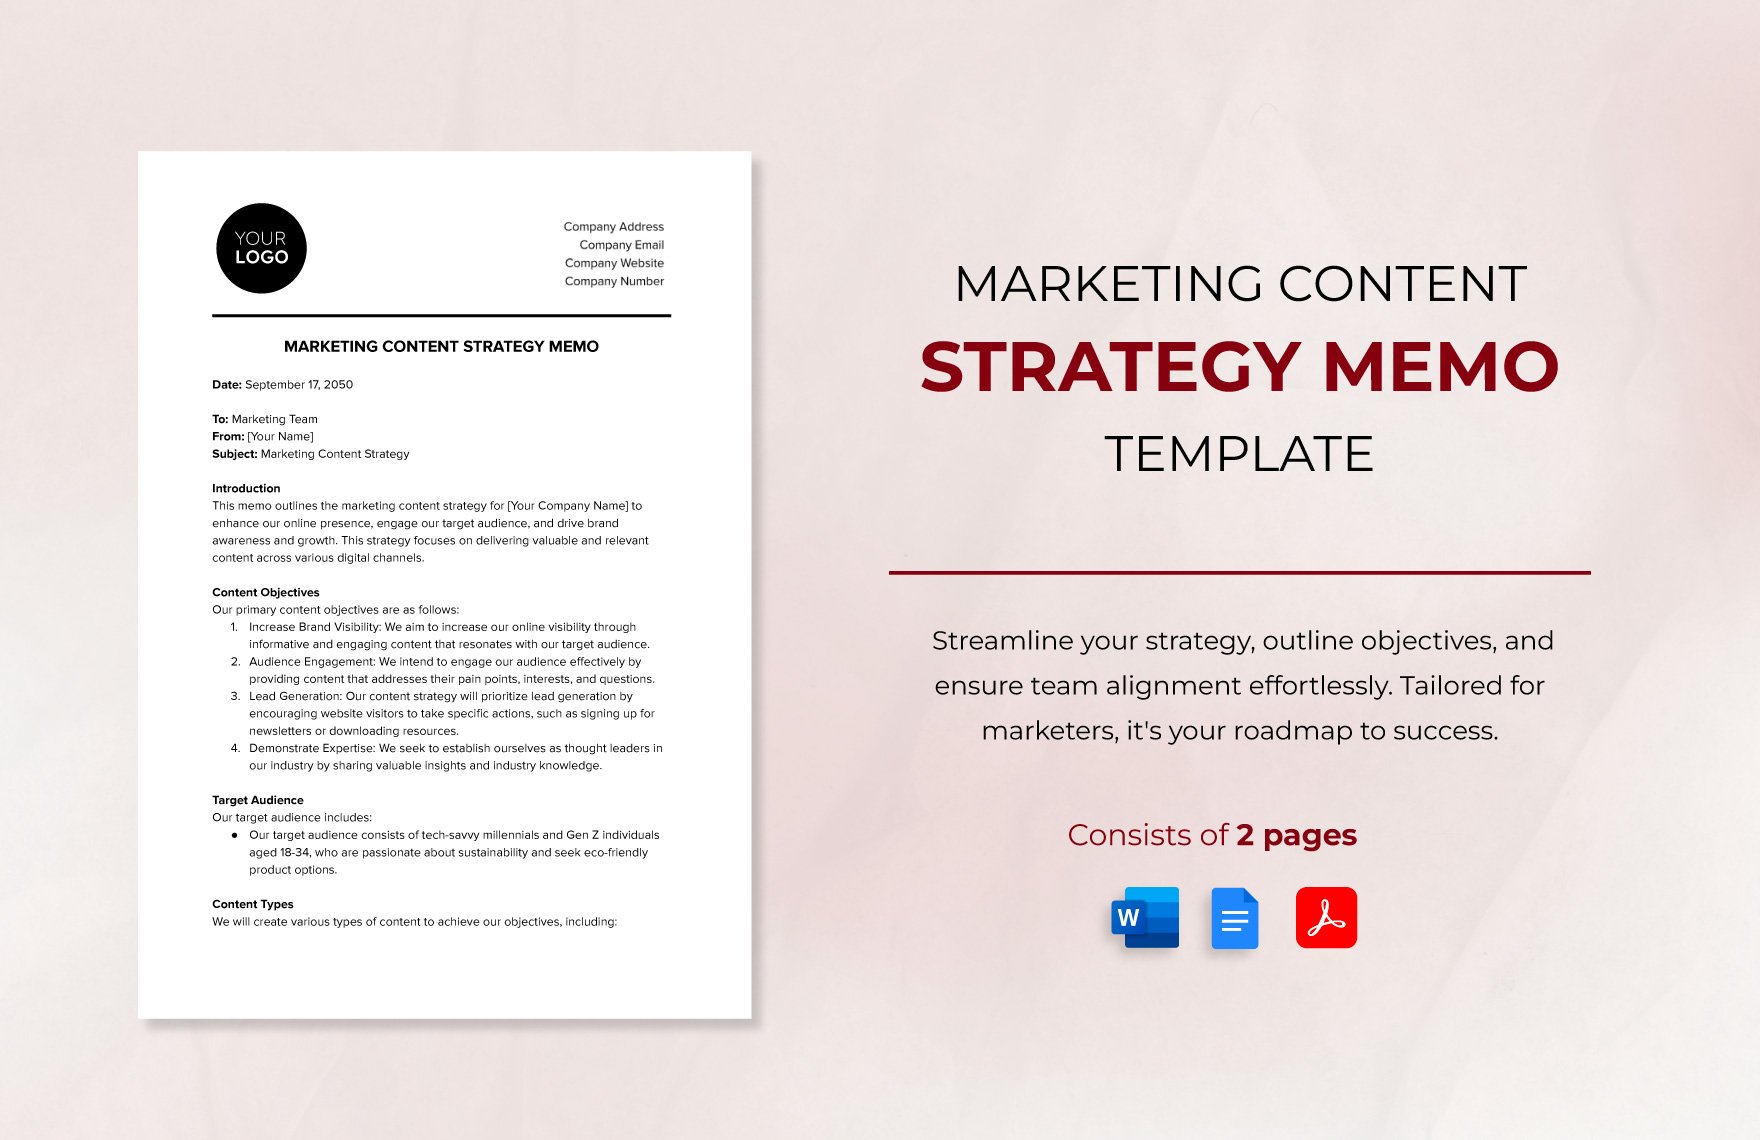 Marketing Content Strategy Memo Template